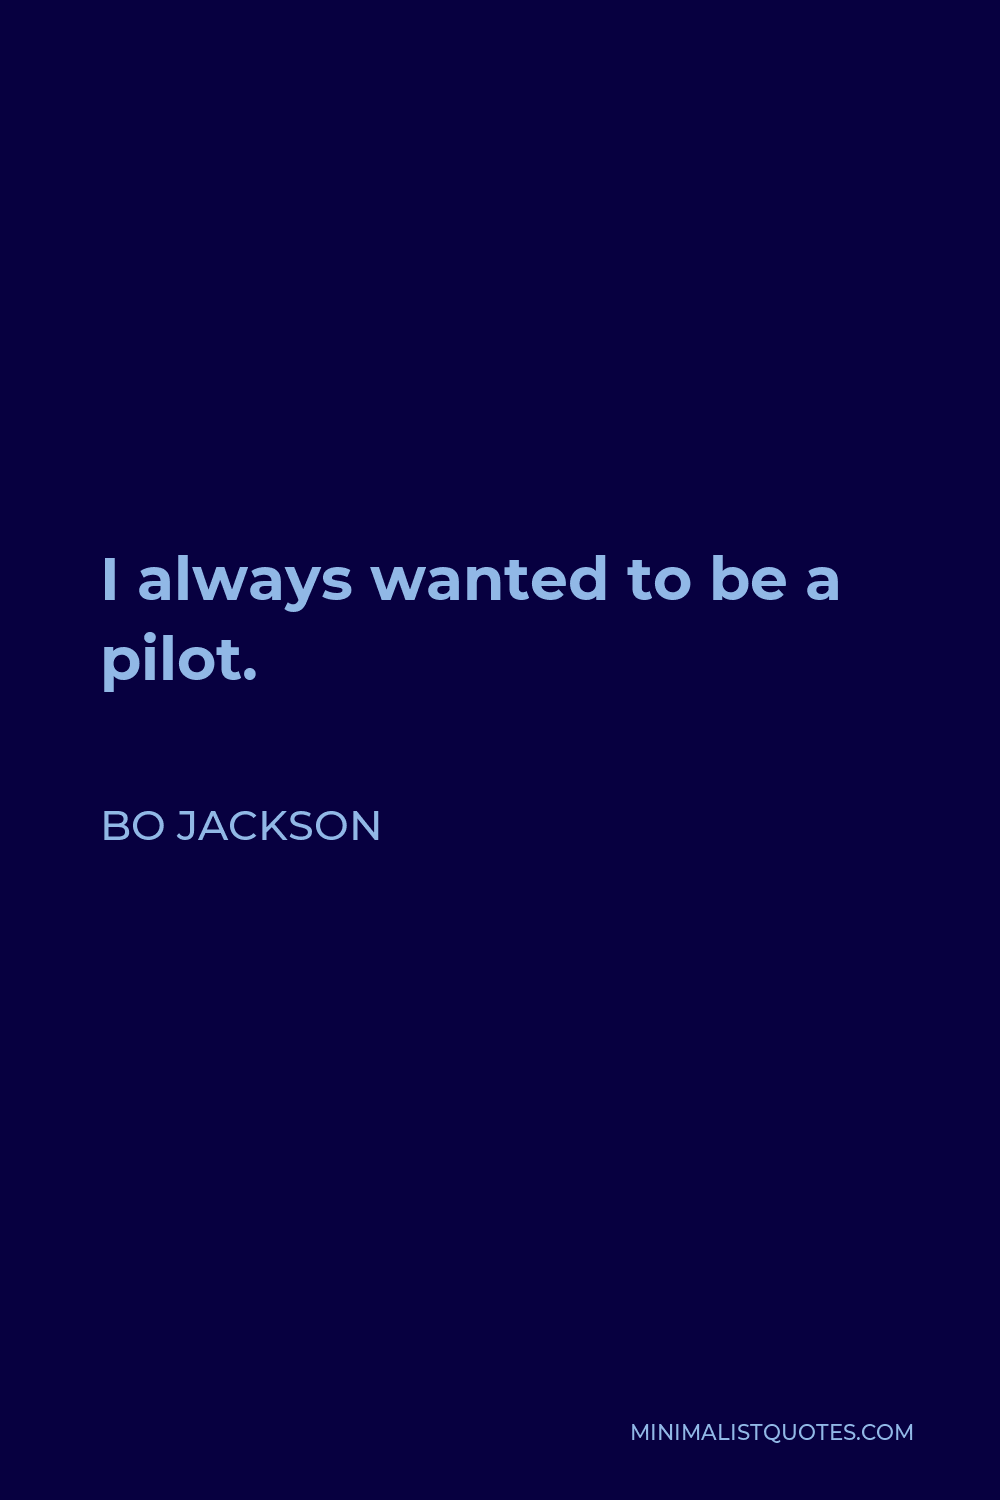 Bo Jackson Quote - I always wanted to be a pilot.